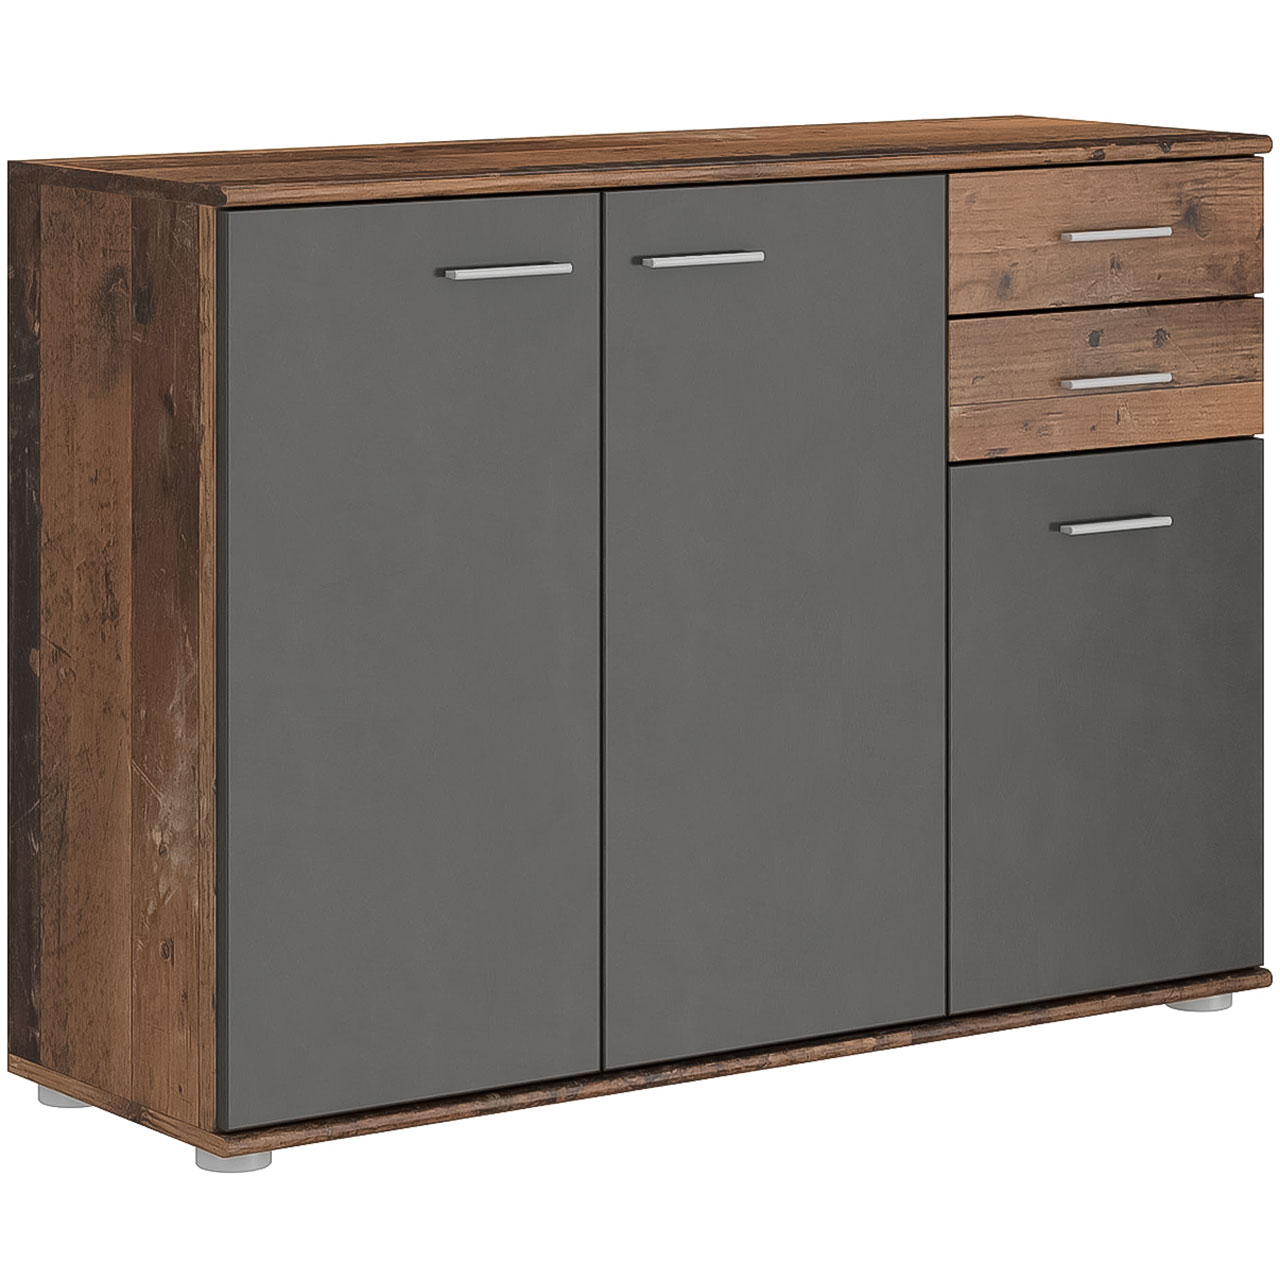 Storage cabinet MIKE 1 old style / matera